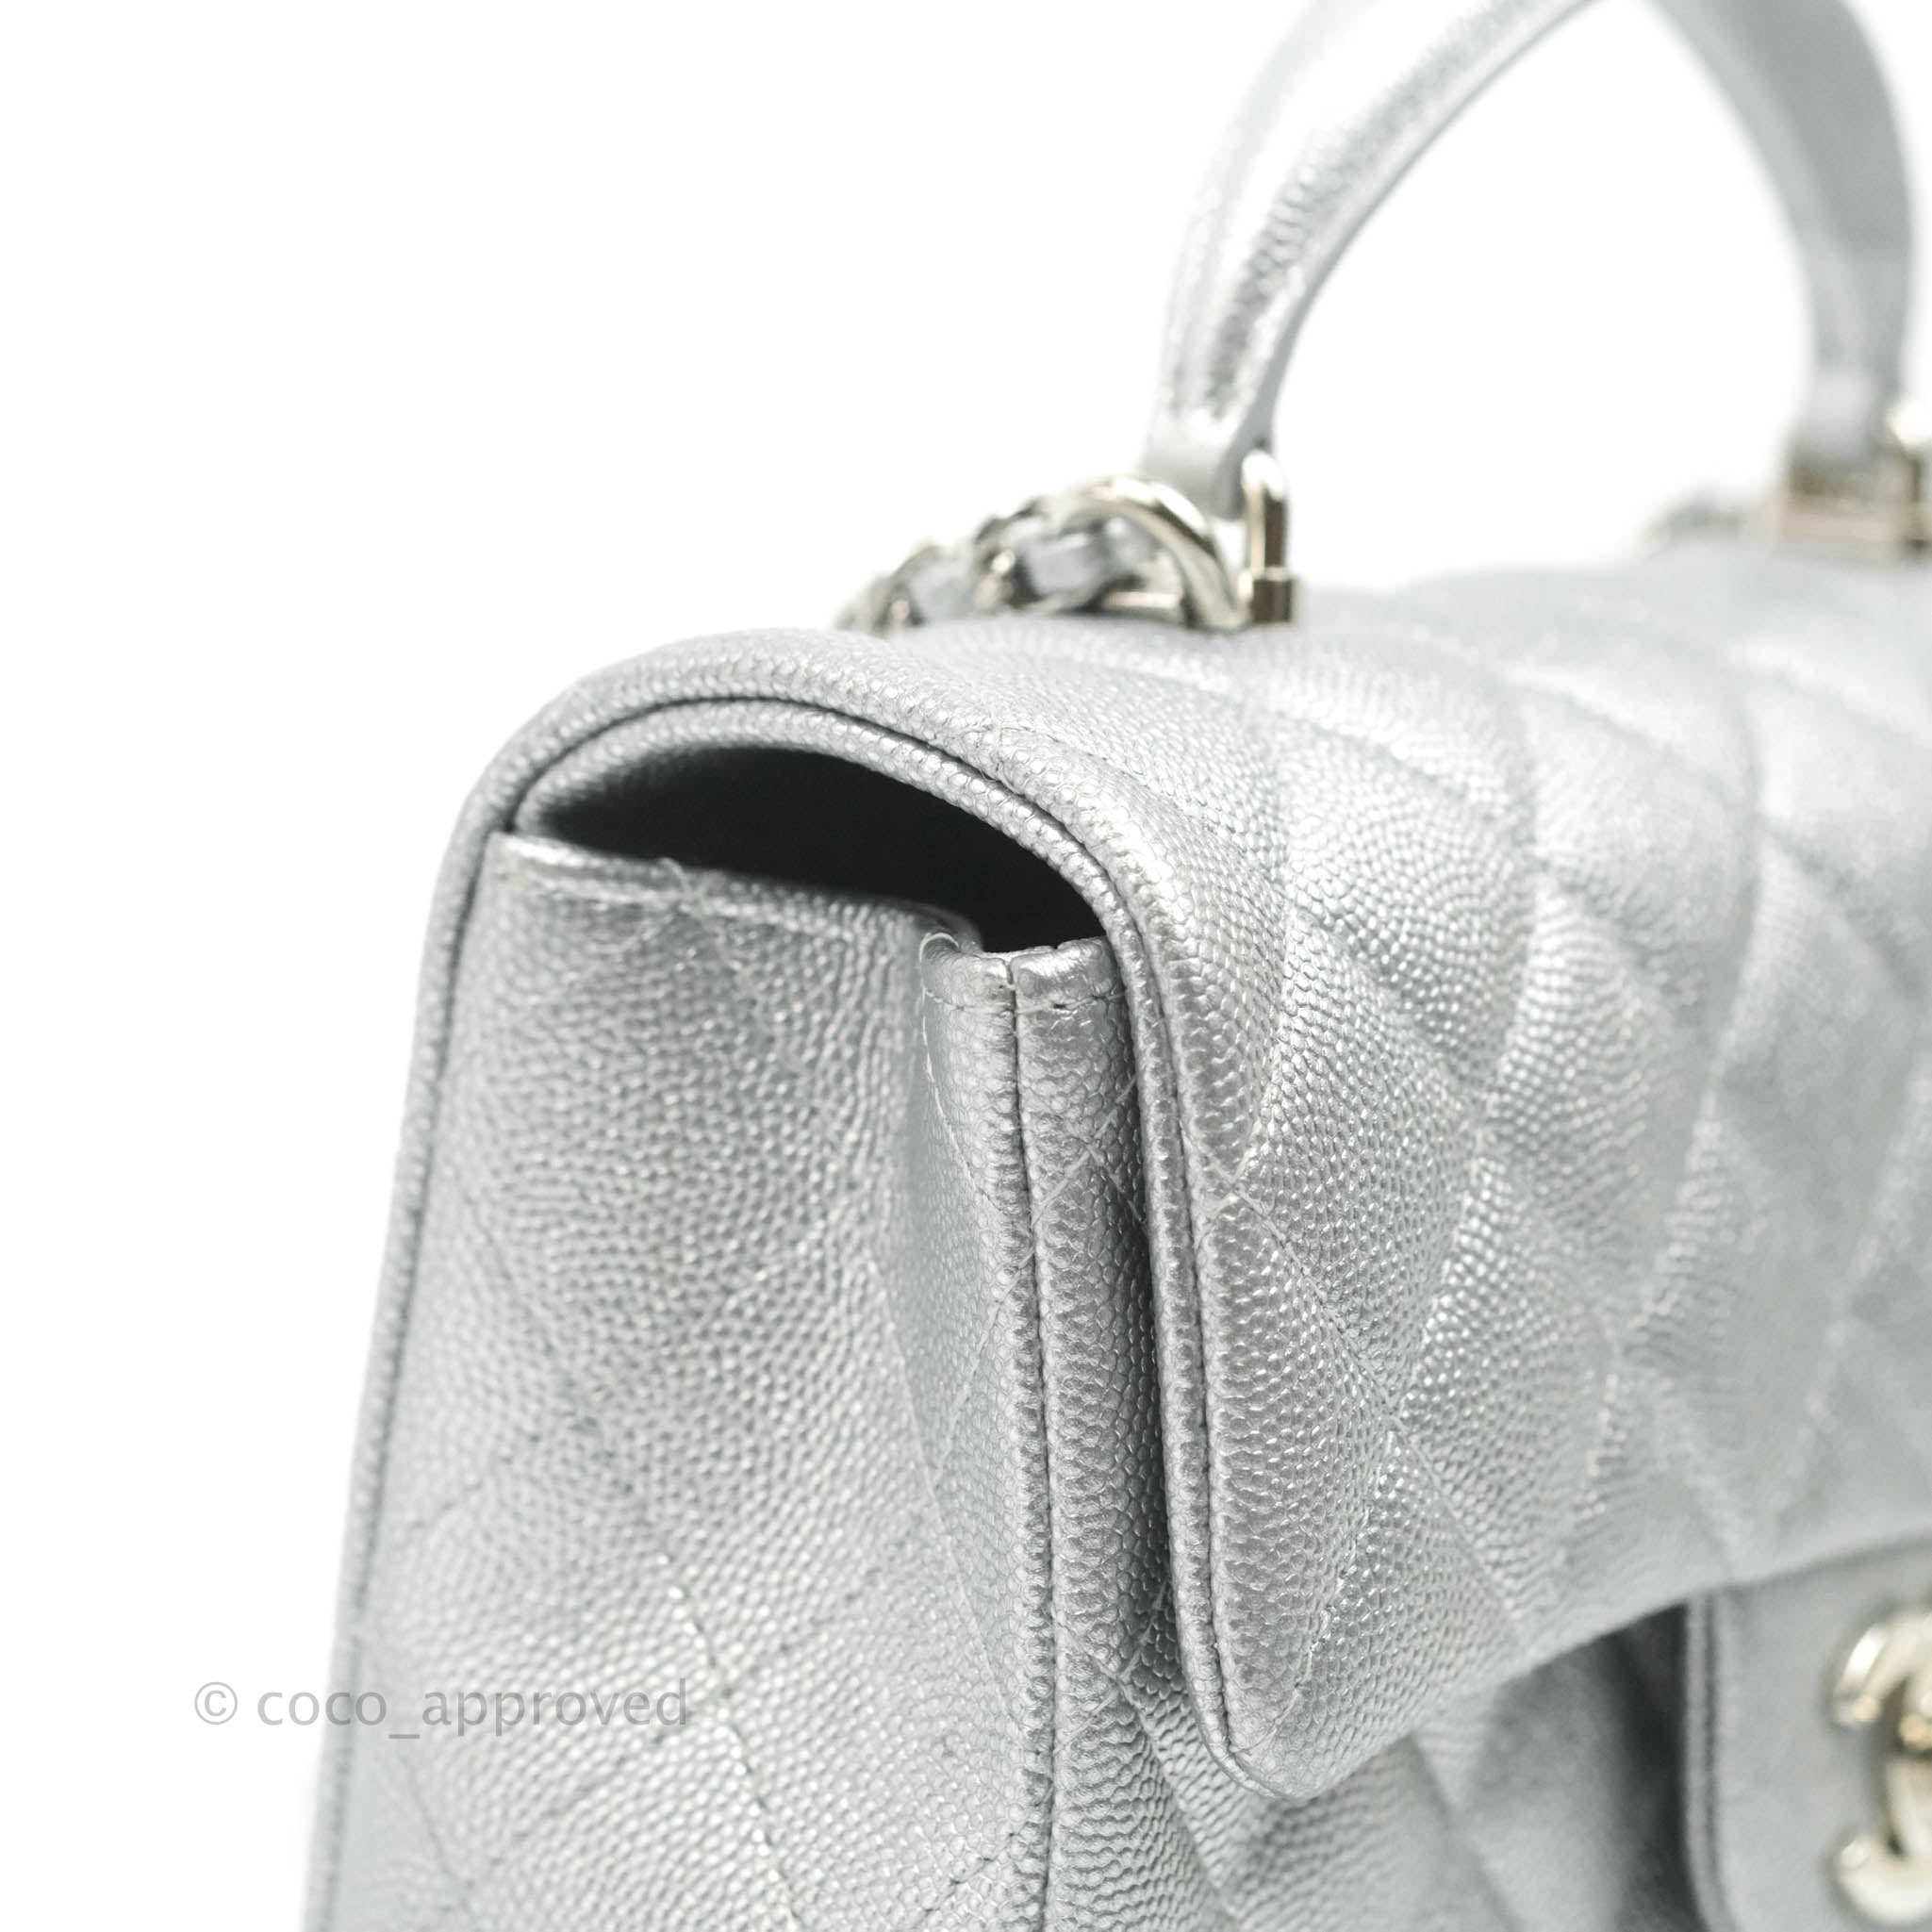 Chanel Top Handle Mini Rectangular Flap Bag Silver Caviar Silver Hardw –  Coco Approved Studio